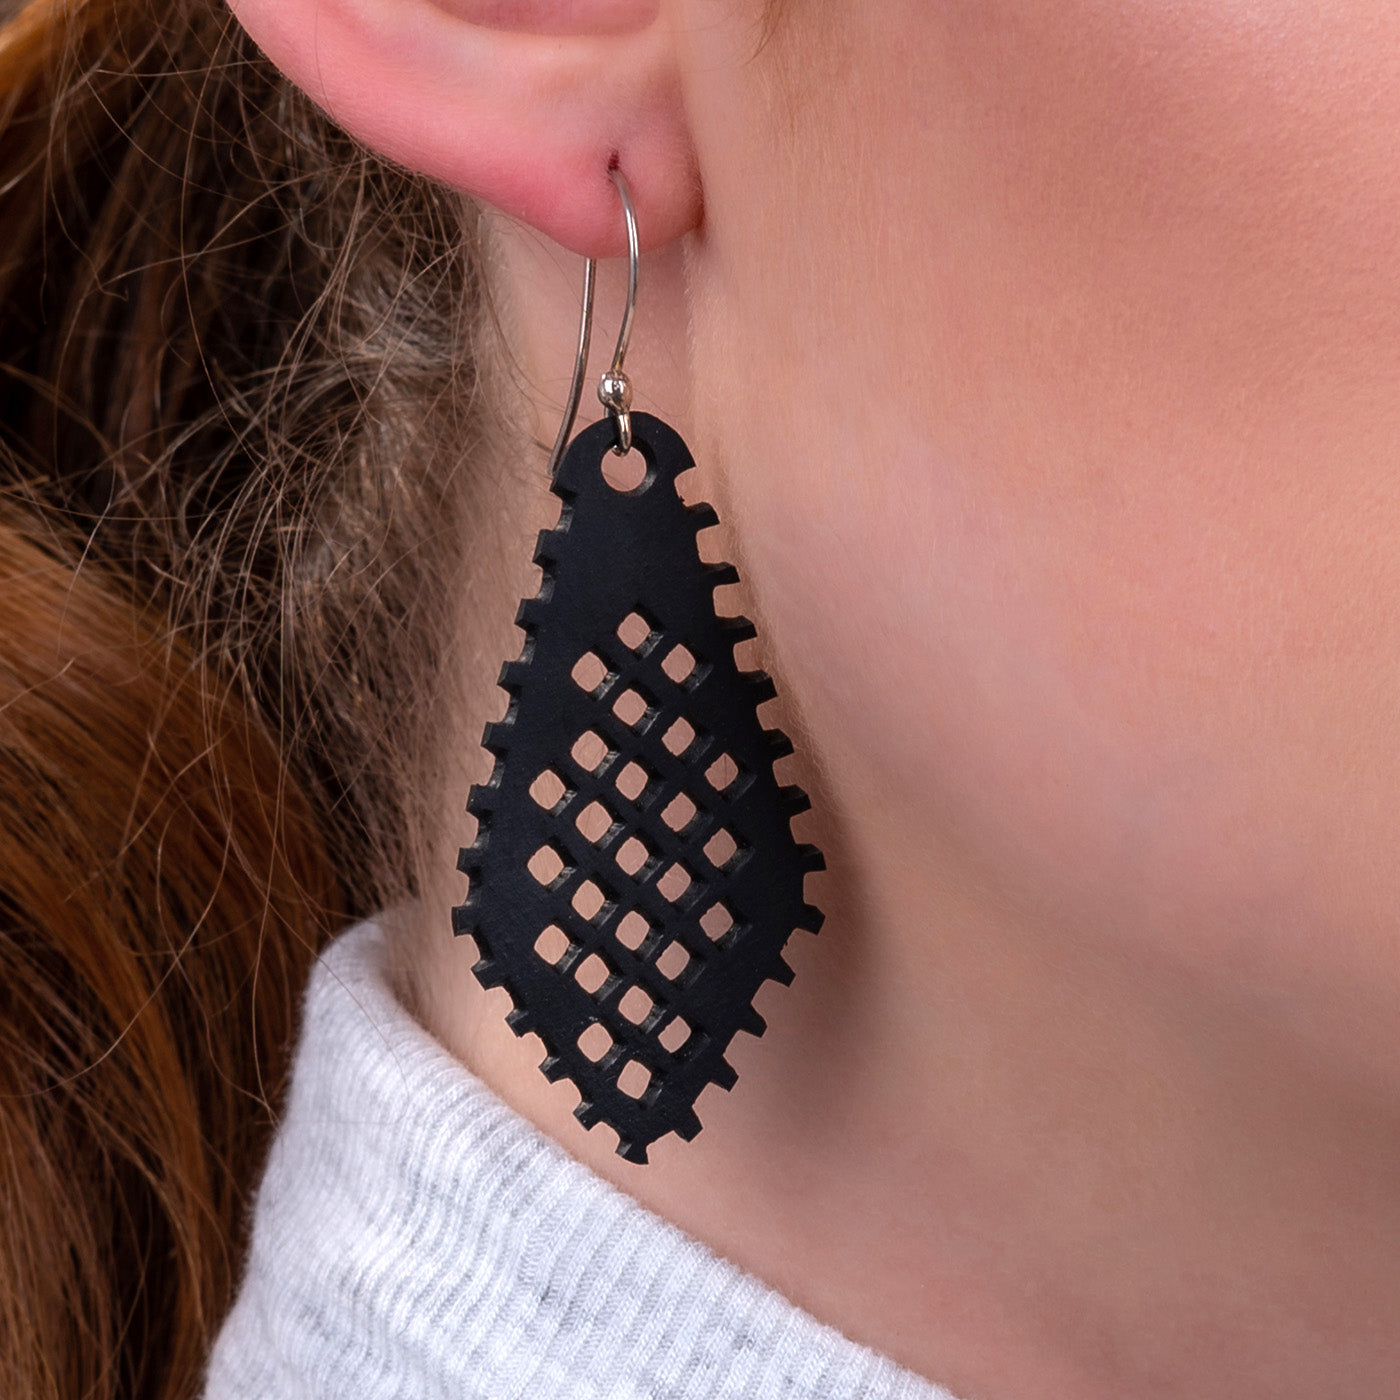 Diamond Recycled Rubber Earrings by Paguro Upcycle